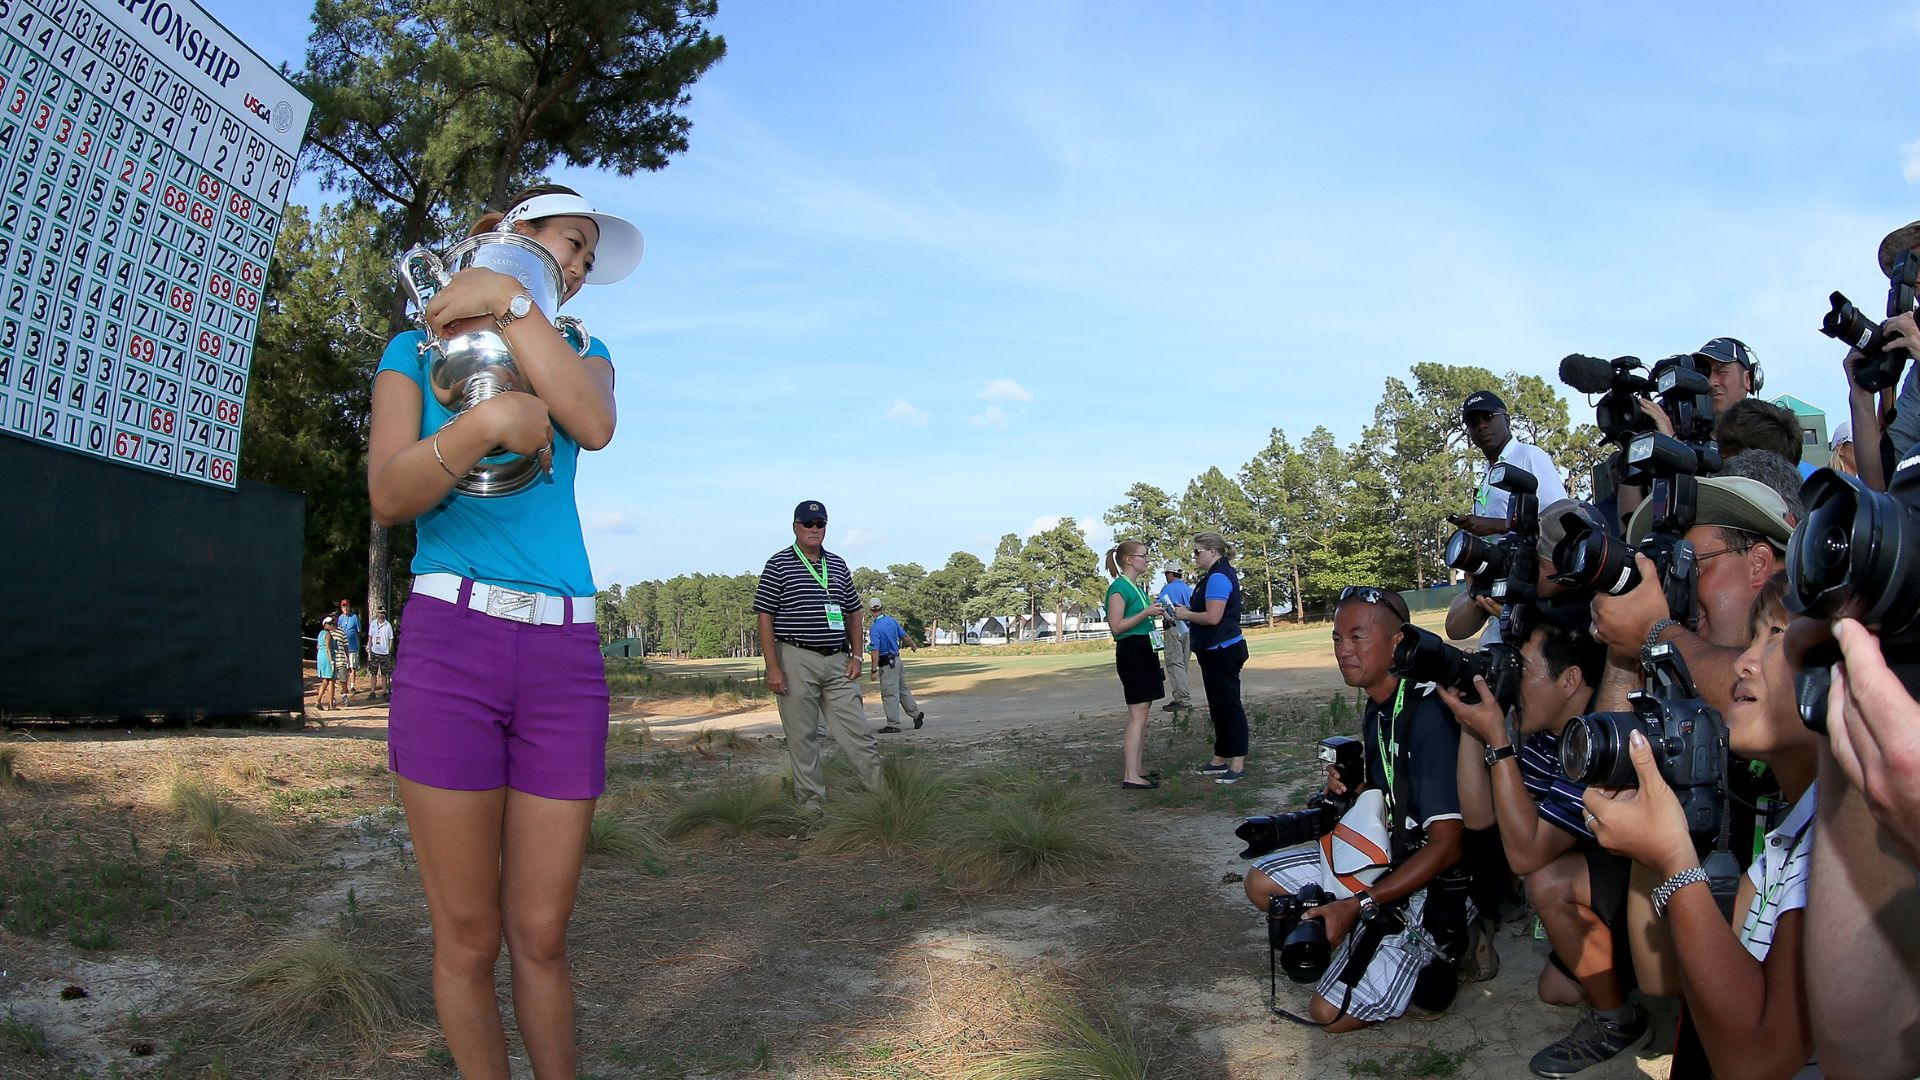 Michelle Wie West looks back on hiding injuries from media, putting up ‘front’